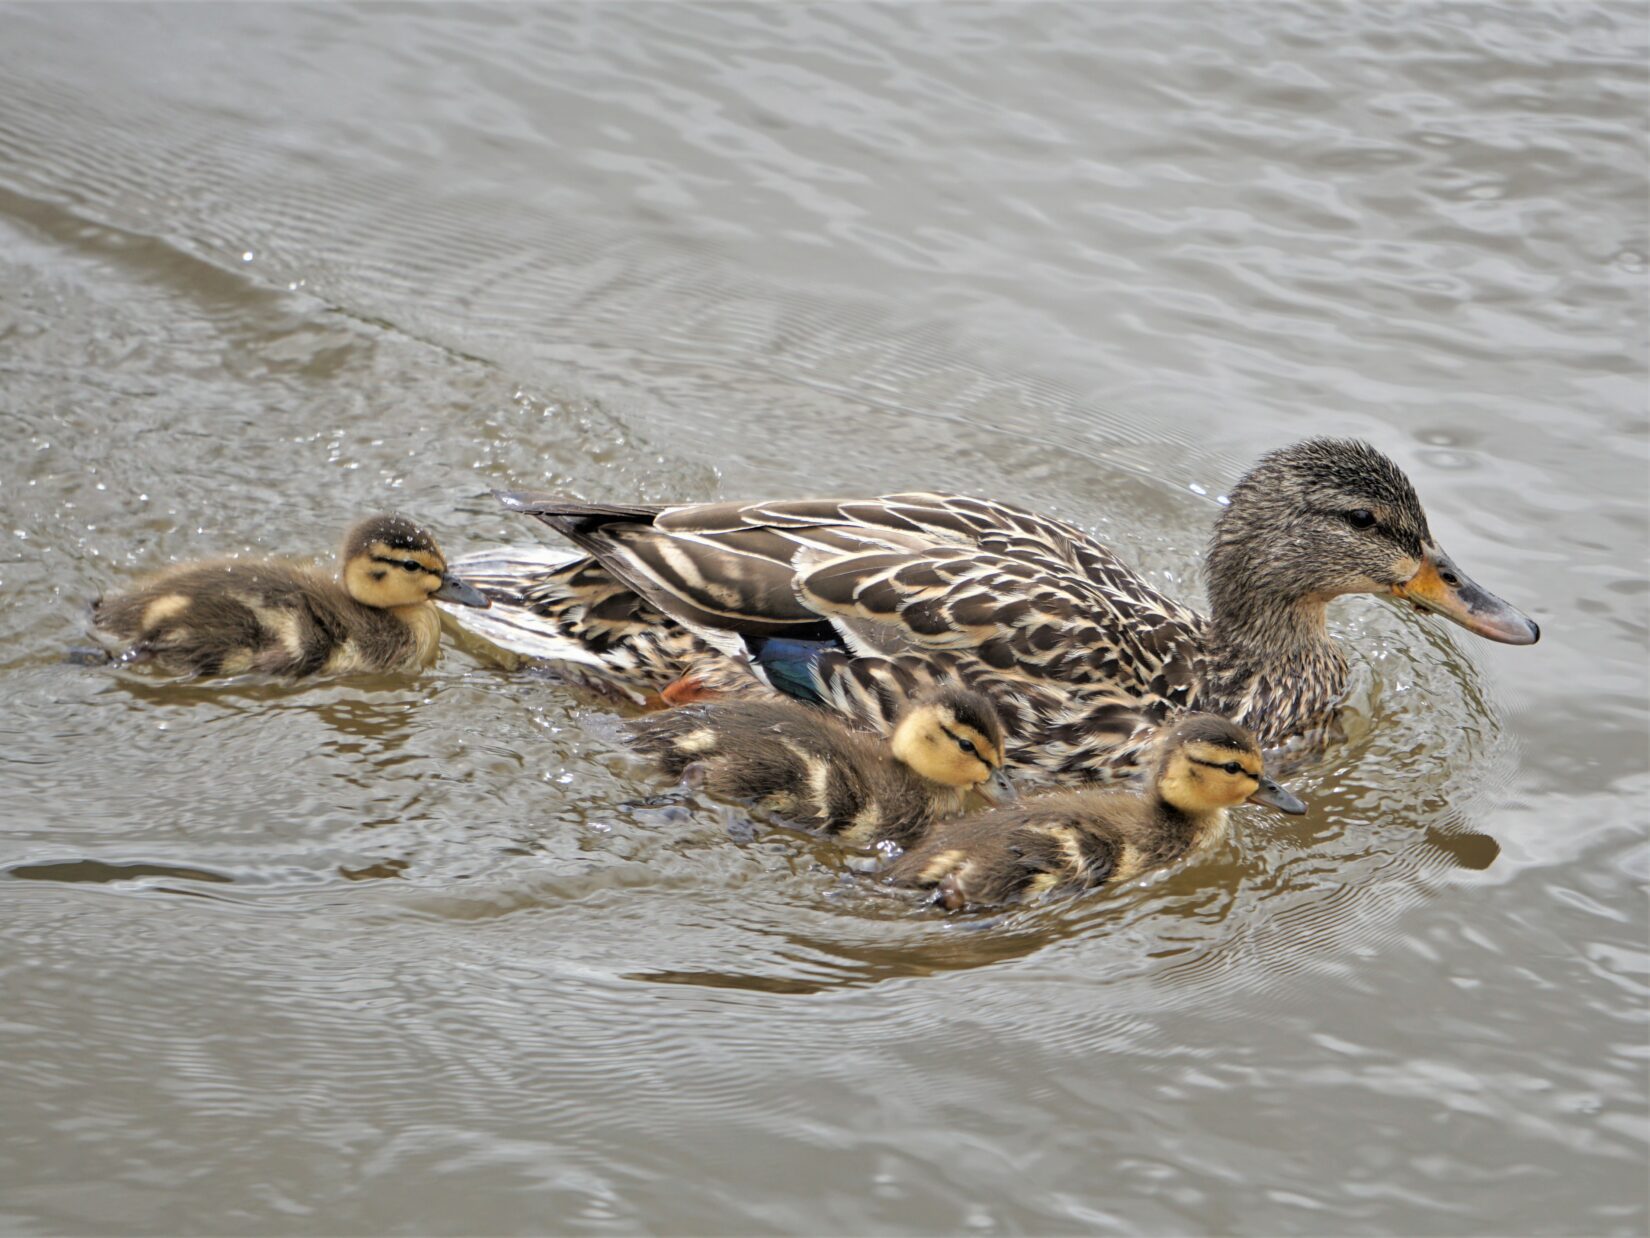 Female mallard swimming with three ducklings in tow